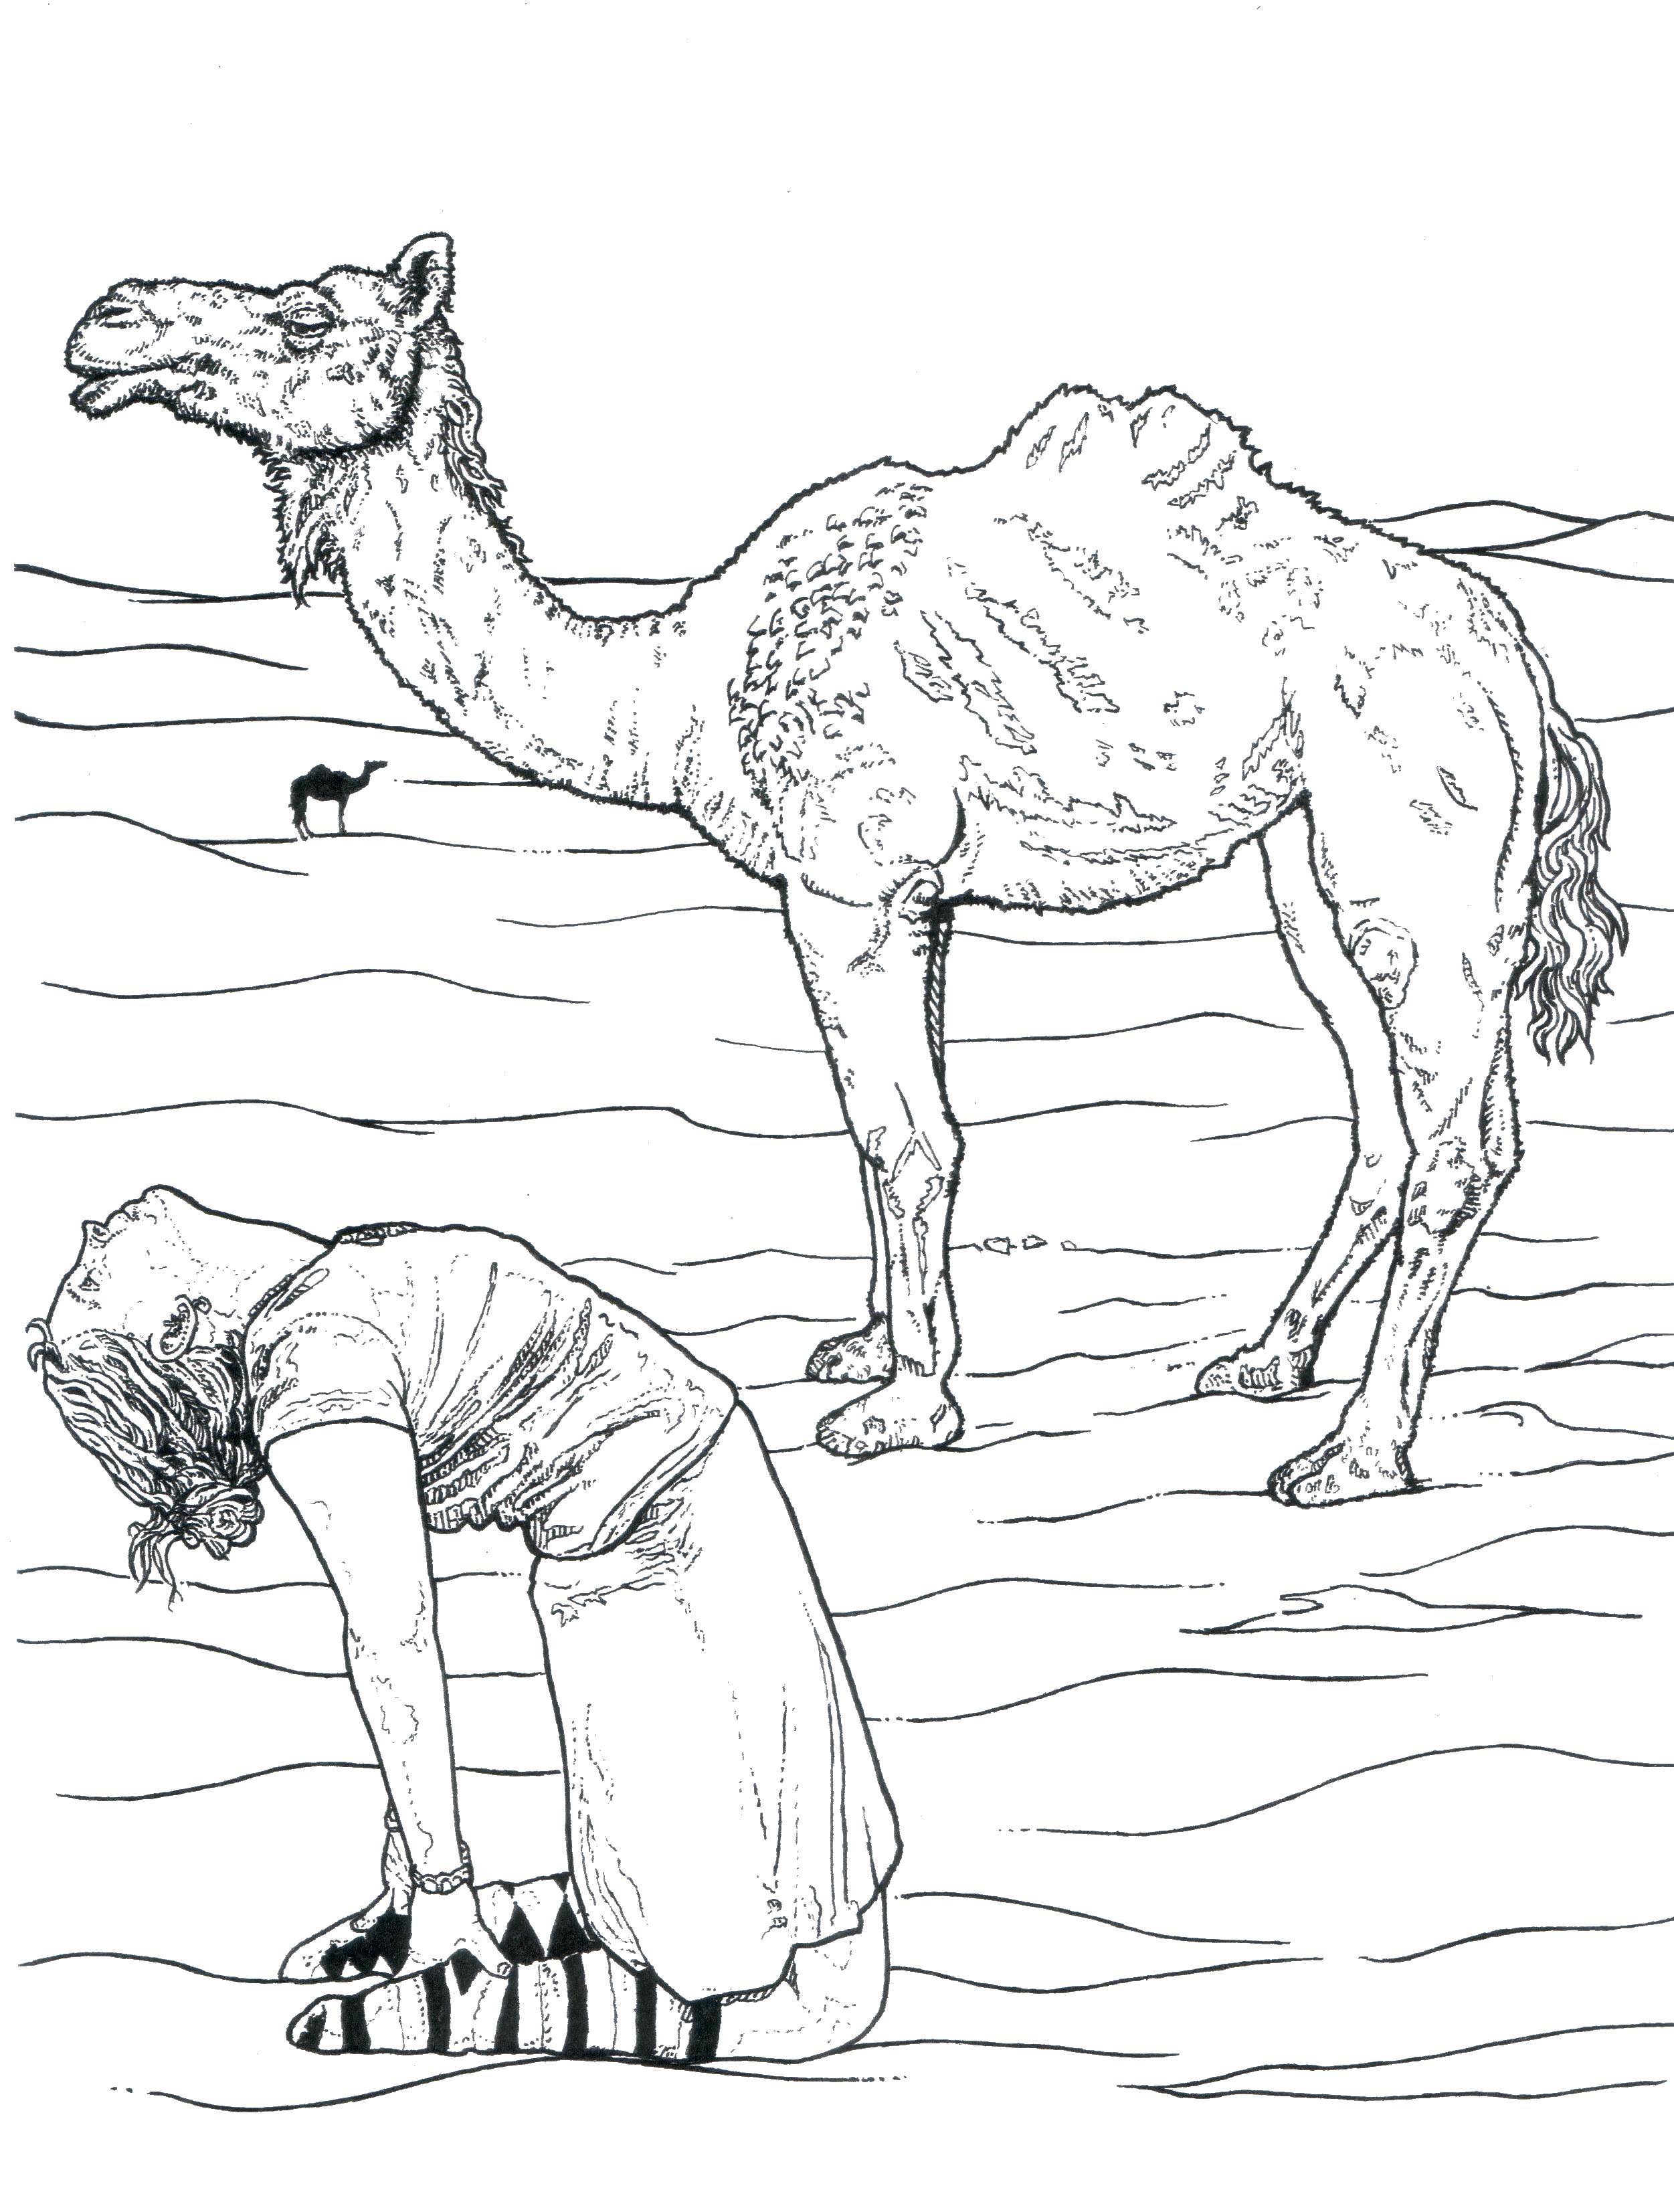 Coloring Camel in the desert with a passenger. Category Animals. Tags:  Camel, man.